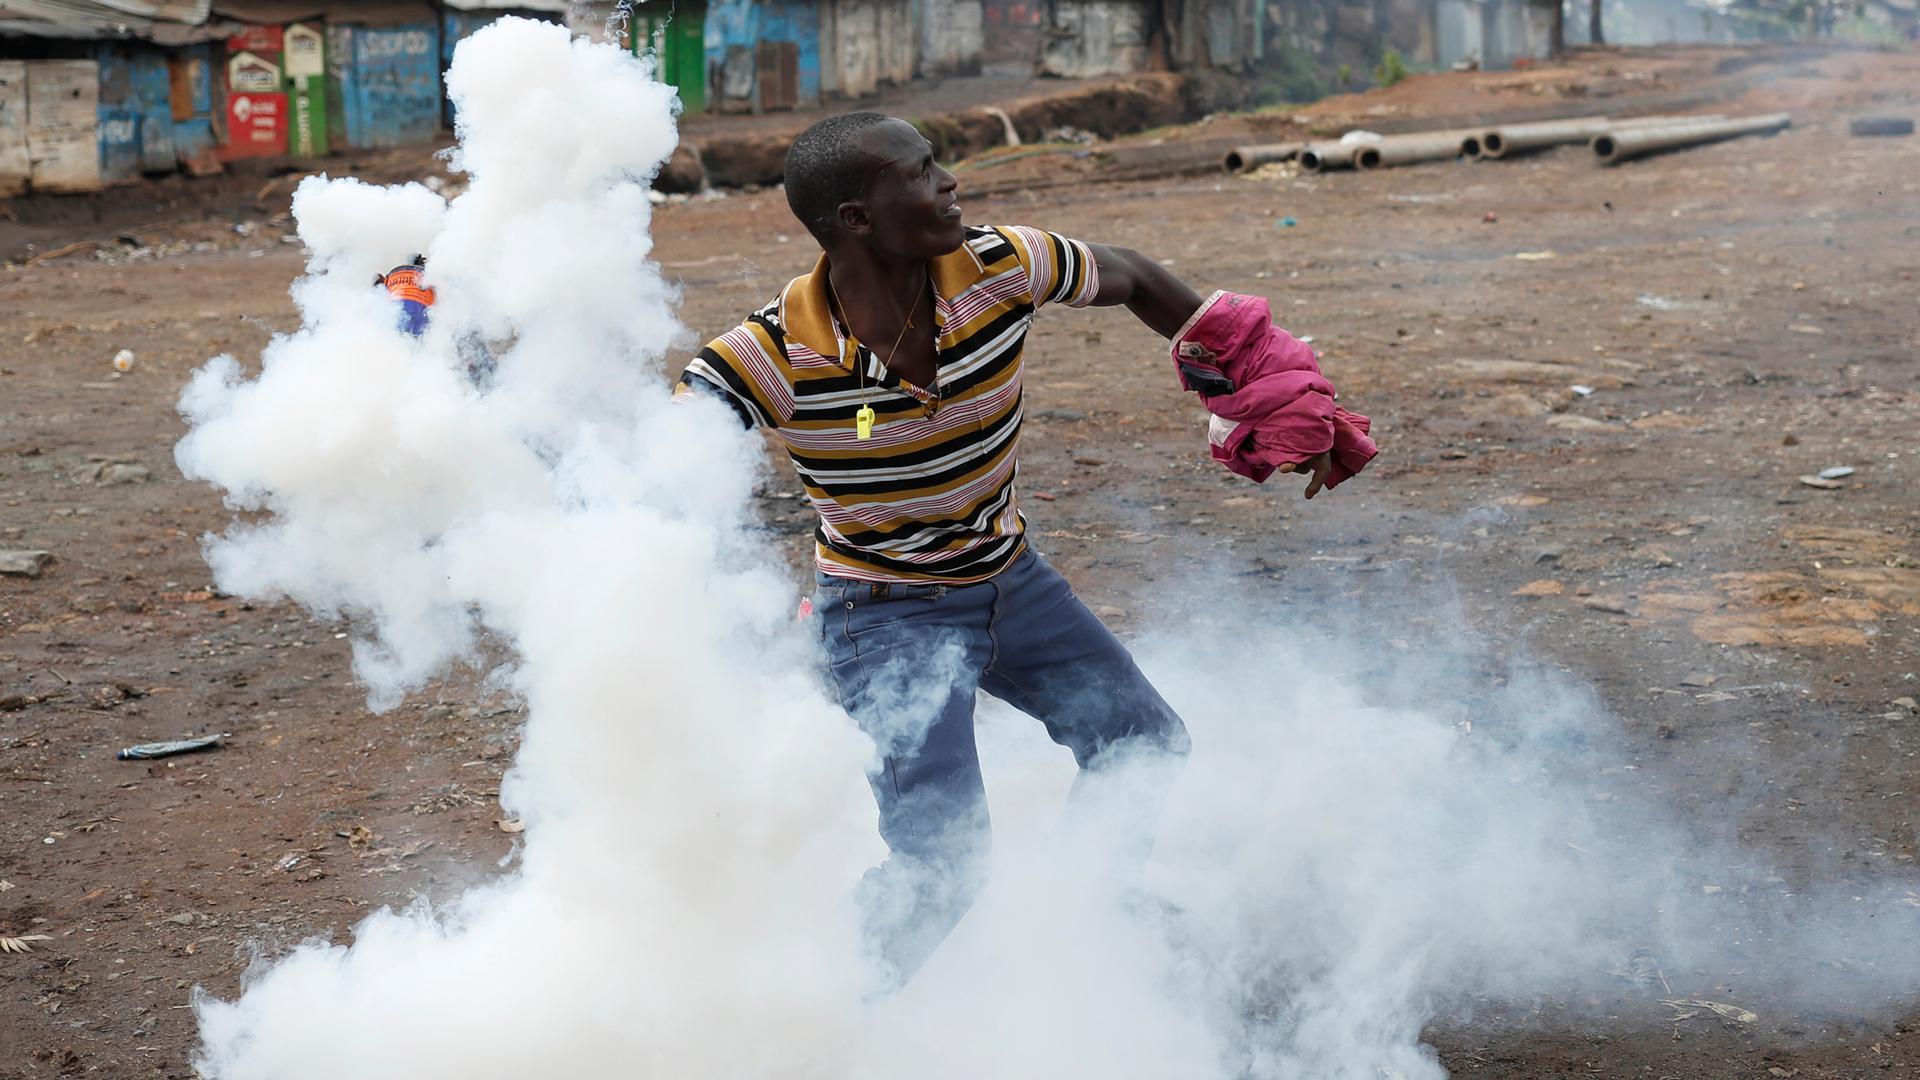 An opposition supporter returns a teargas canister fired by police during clashes in Kibera slum in Nairobi, Kenya, Oct. 26, 2017.